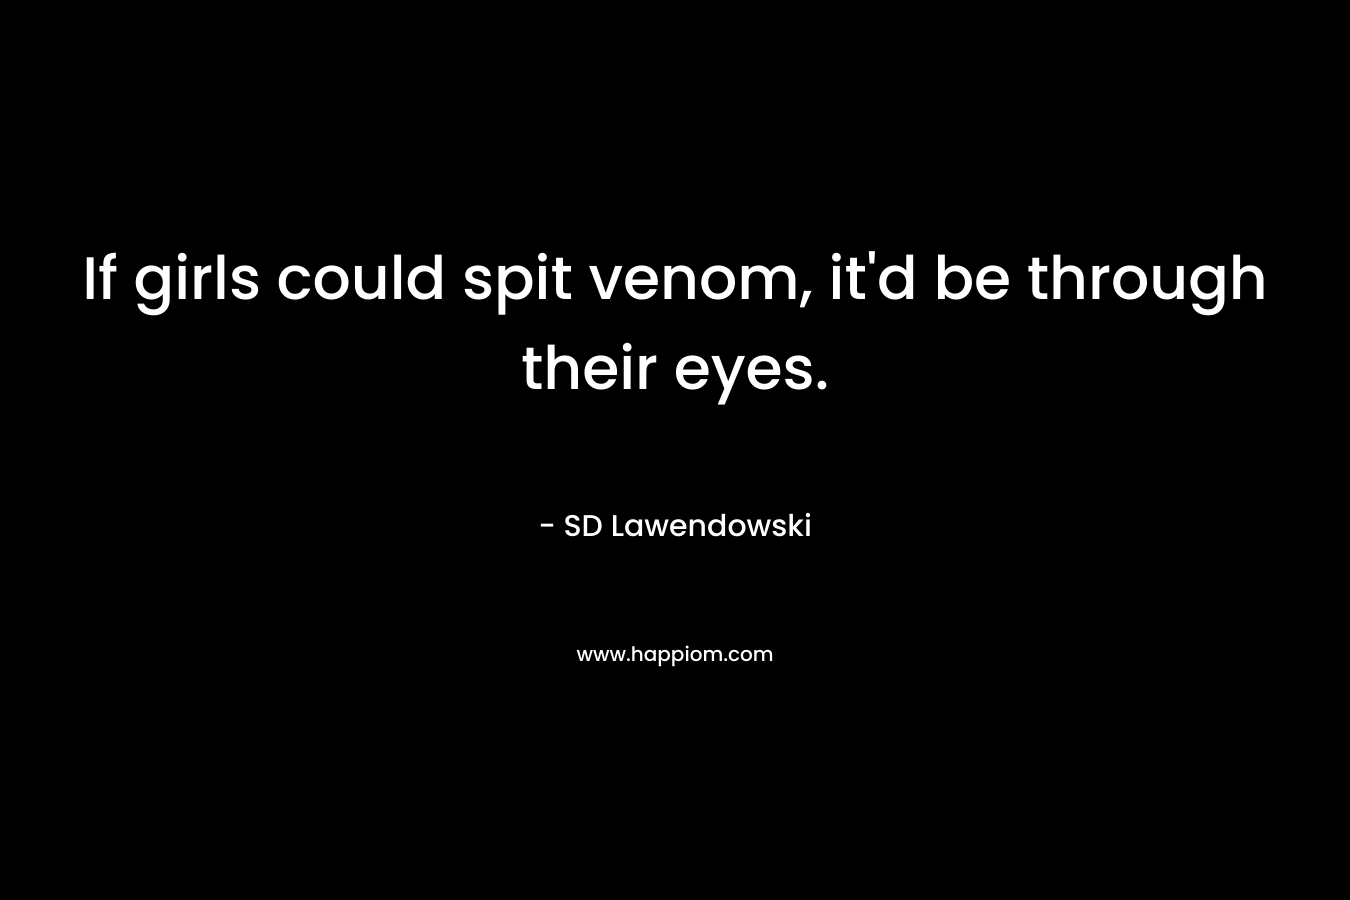 If girls could spit venom, it'd be through their eyes.